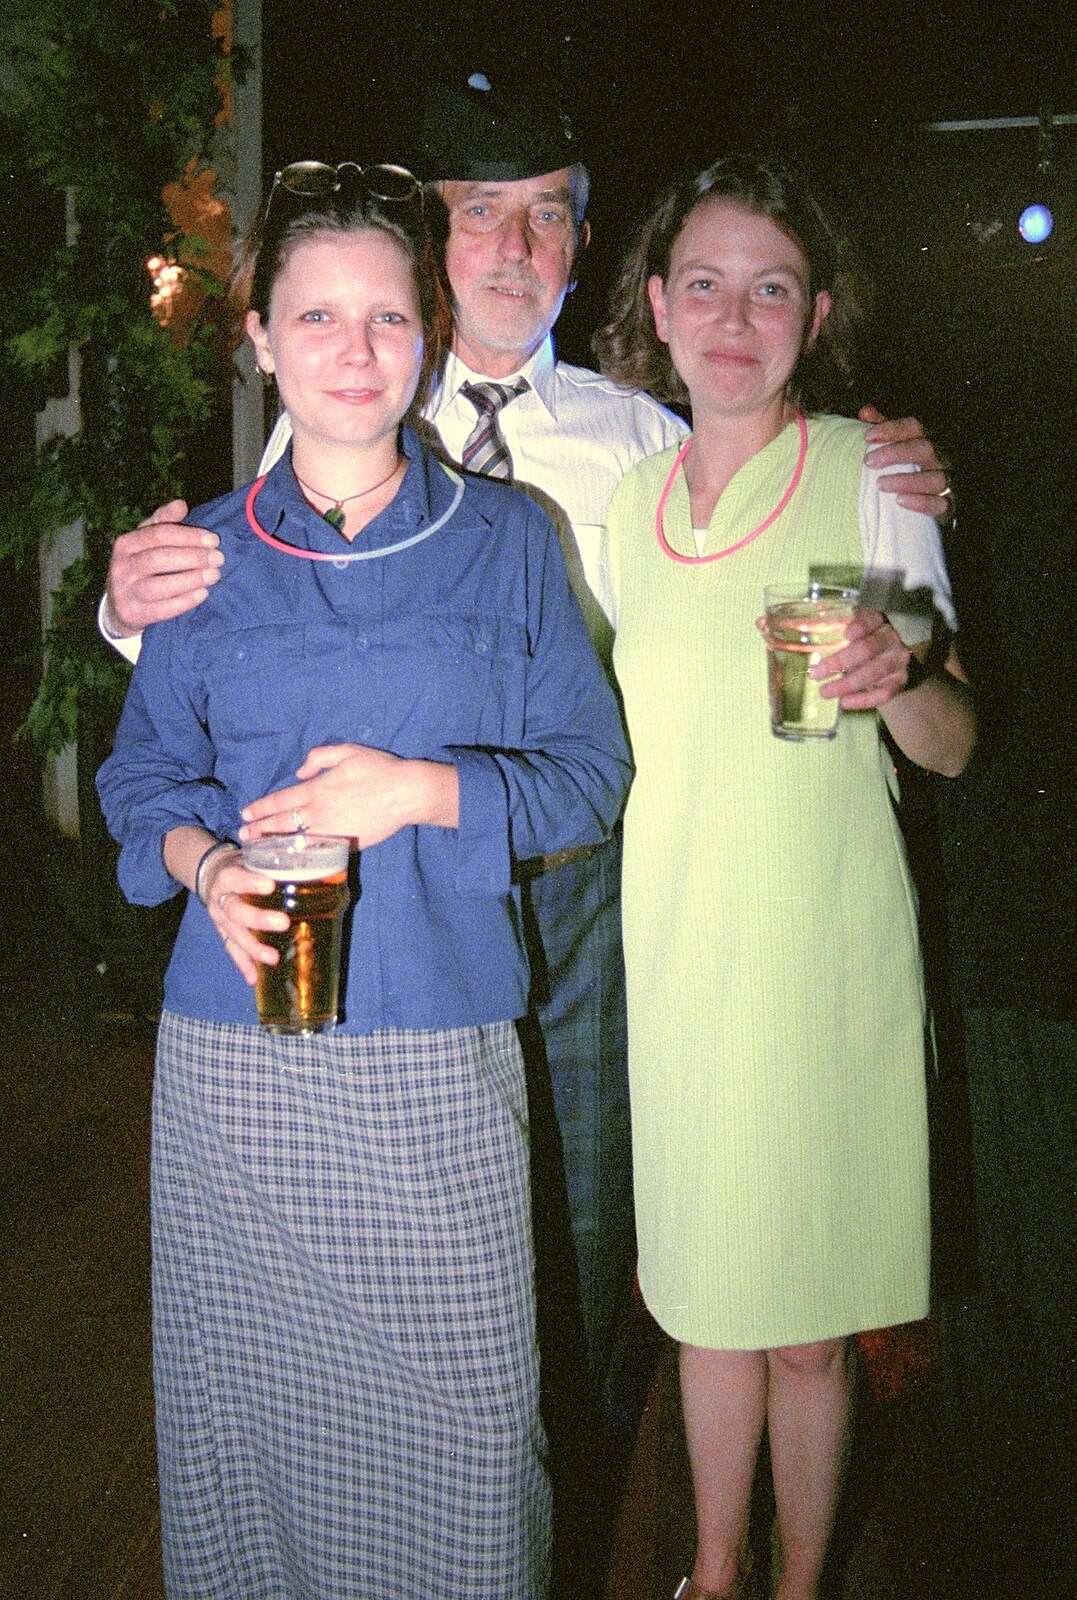 Hamish and Jane's Wedding, Canford School, Wimborne, Dorset - 5th August 1998: The girls next door (from Hamish's old house in New Milton)